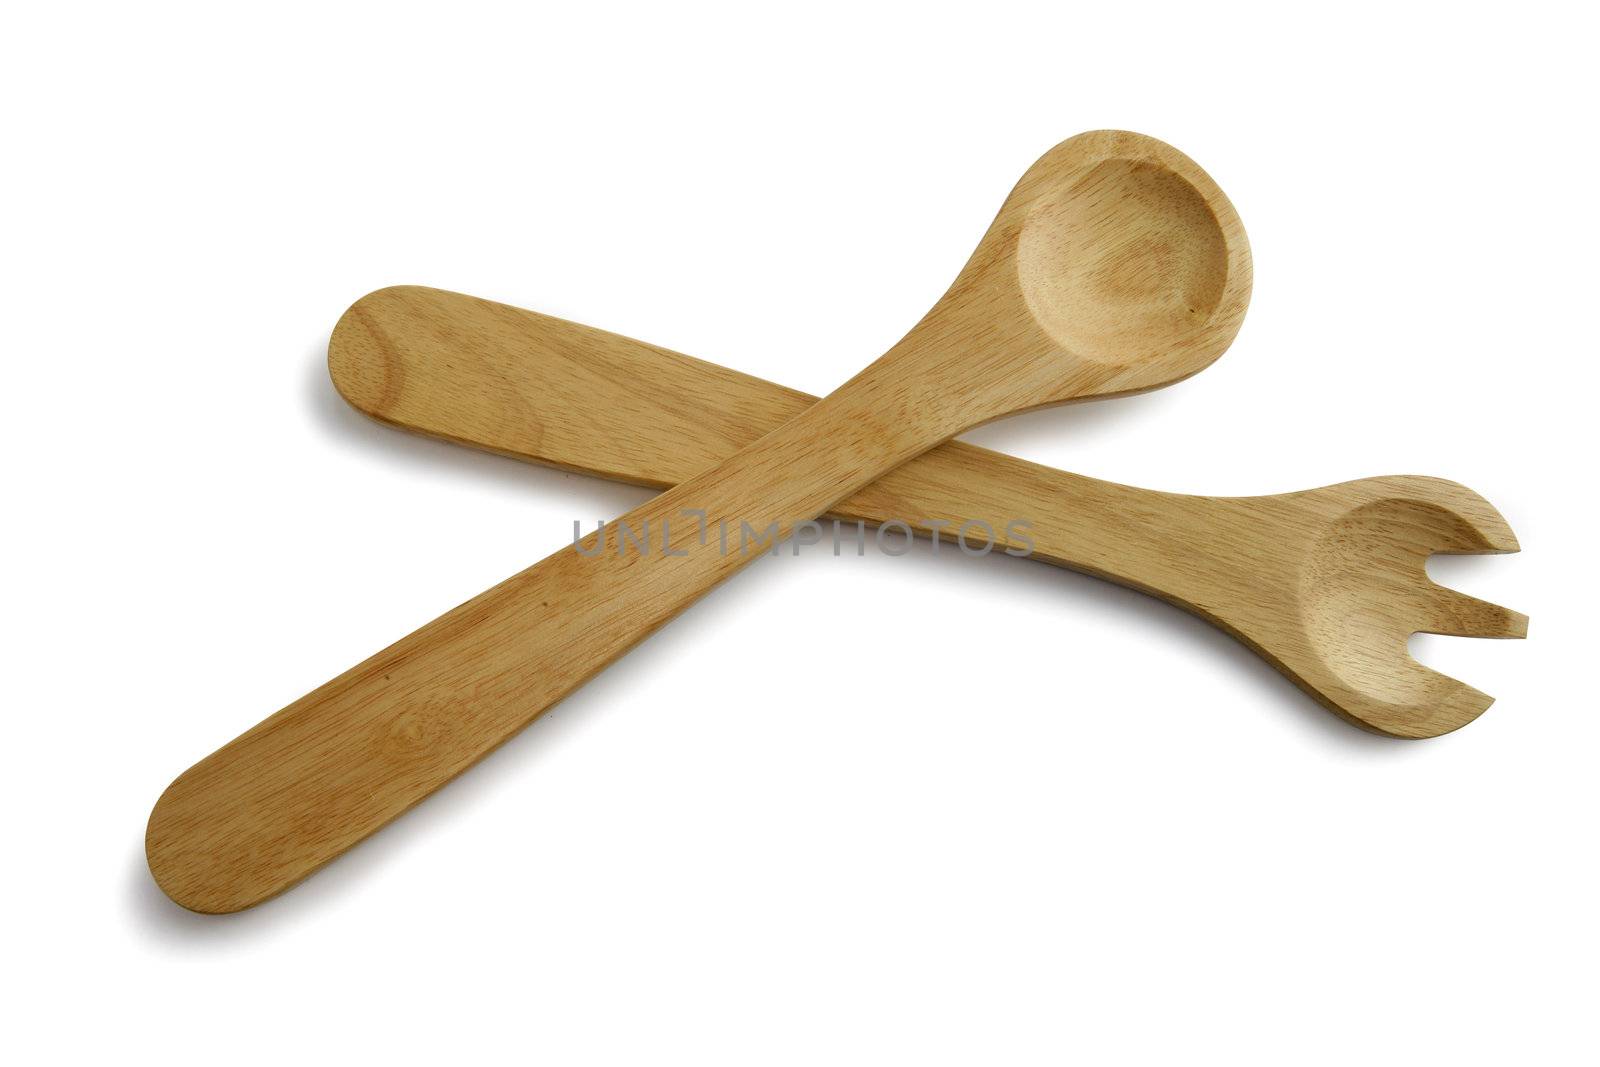 Wooden spoon and fork by phovoir